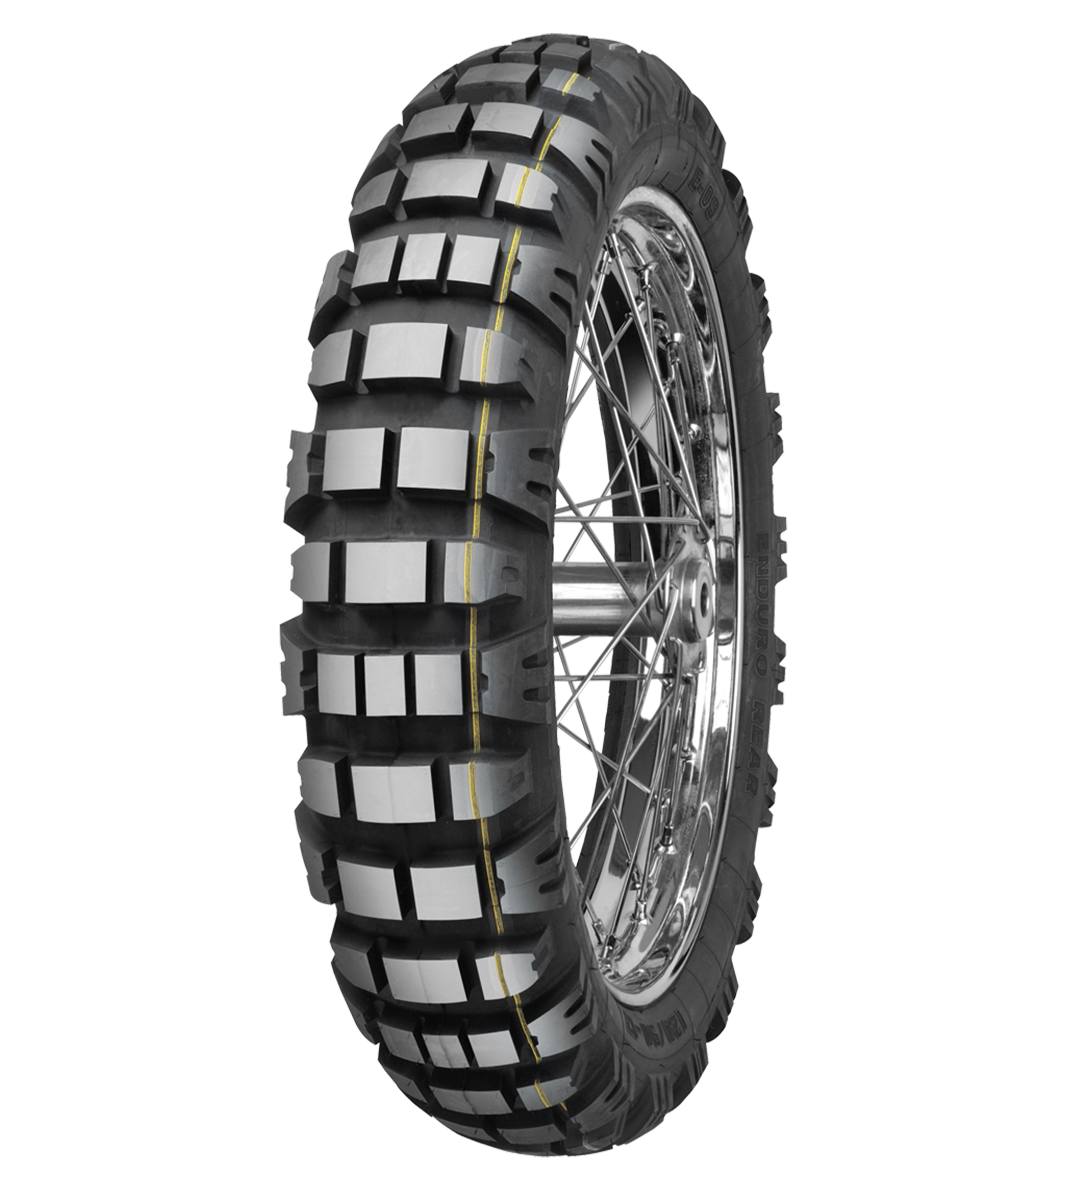 Mitas E-09 ENDURO 150/70-18 Trail OFF Trail DAKAR 70R Yellow Tubeless Rear Tire, 224172, 150/70-18, Adventure Touring, E Series, E-09 Enduro, Rear, Trail, Trail OFF, Tires - Imported and distributed in North &amp; South America by Lindeco Genuine Powersports - Premier Powersports Equipment and Accessories for Motorcycle Enthusiasts, Professional Riders and Dealers.